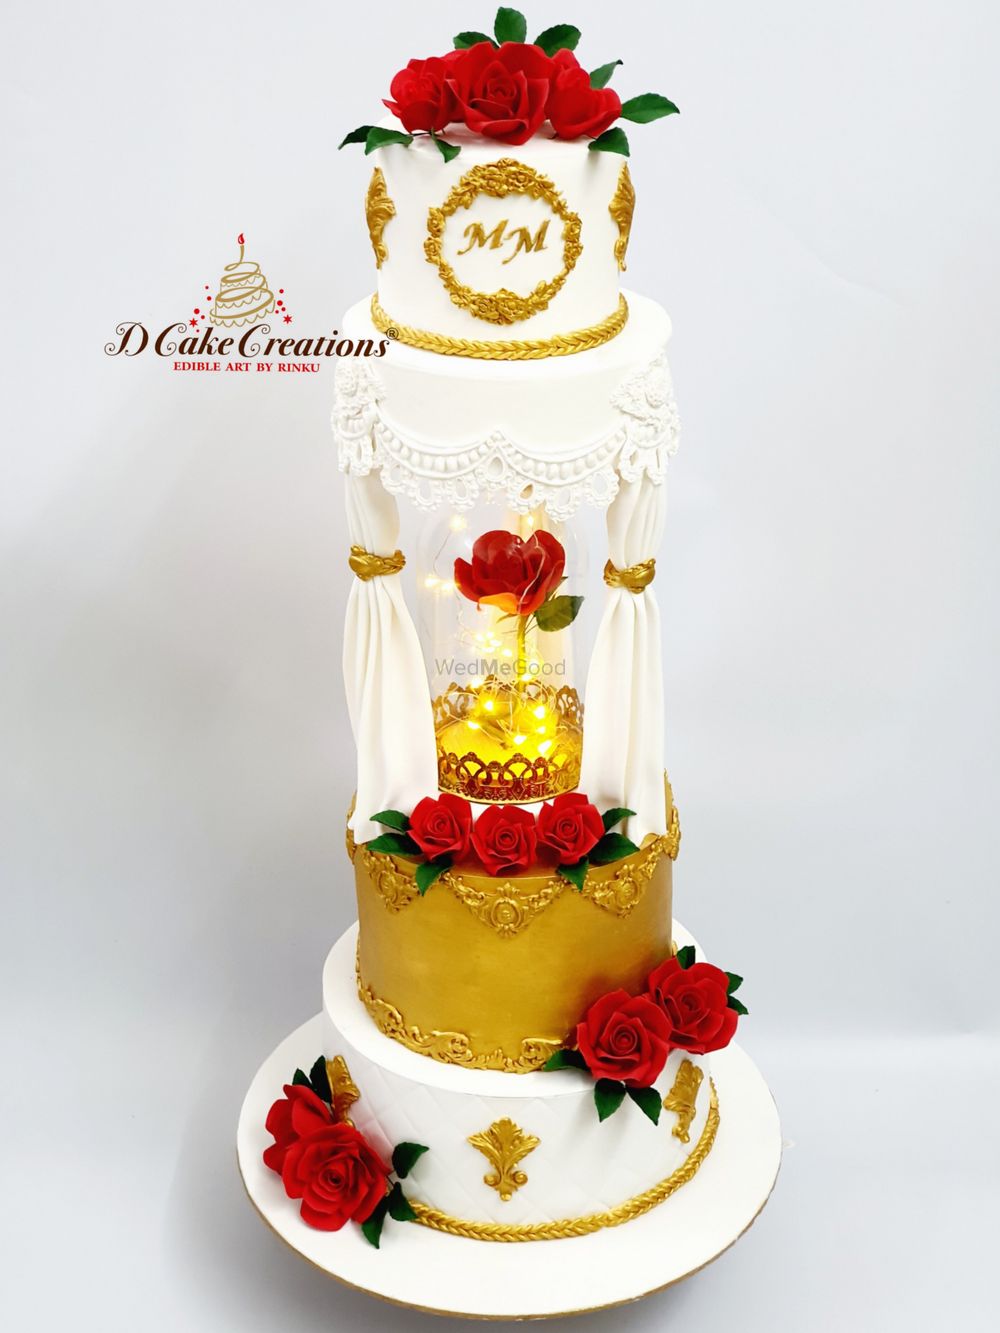 Photo By D Cake Creations - Cake